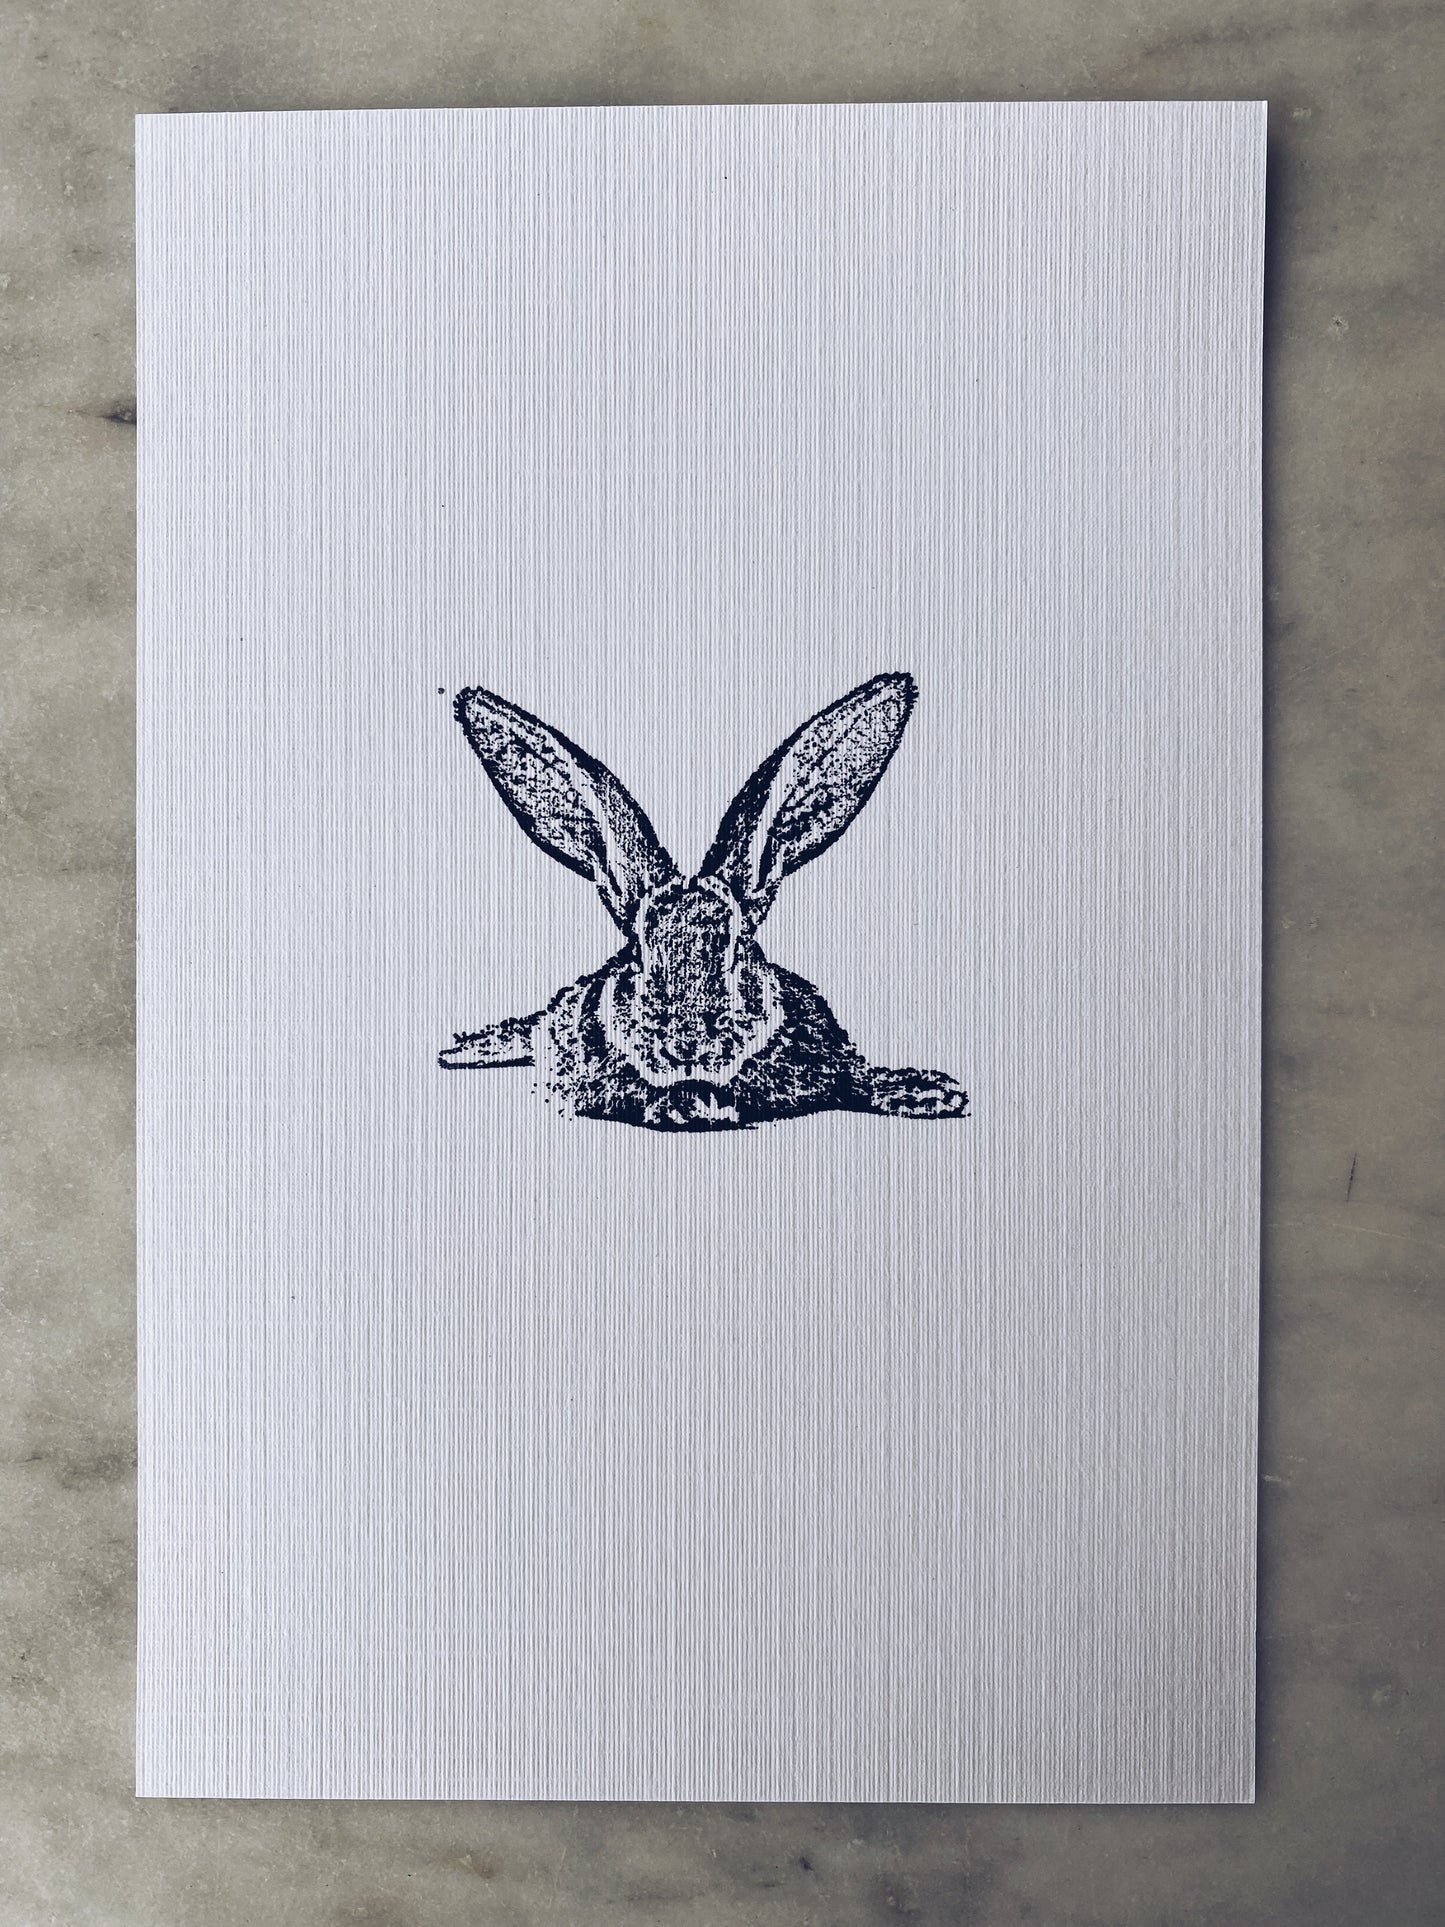 Rabbit Notecards with Envelopes